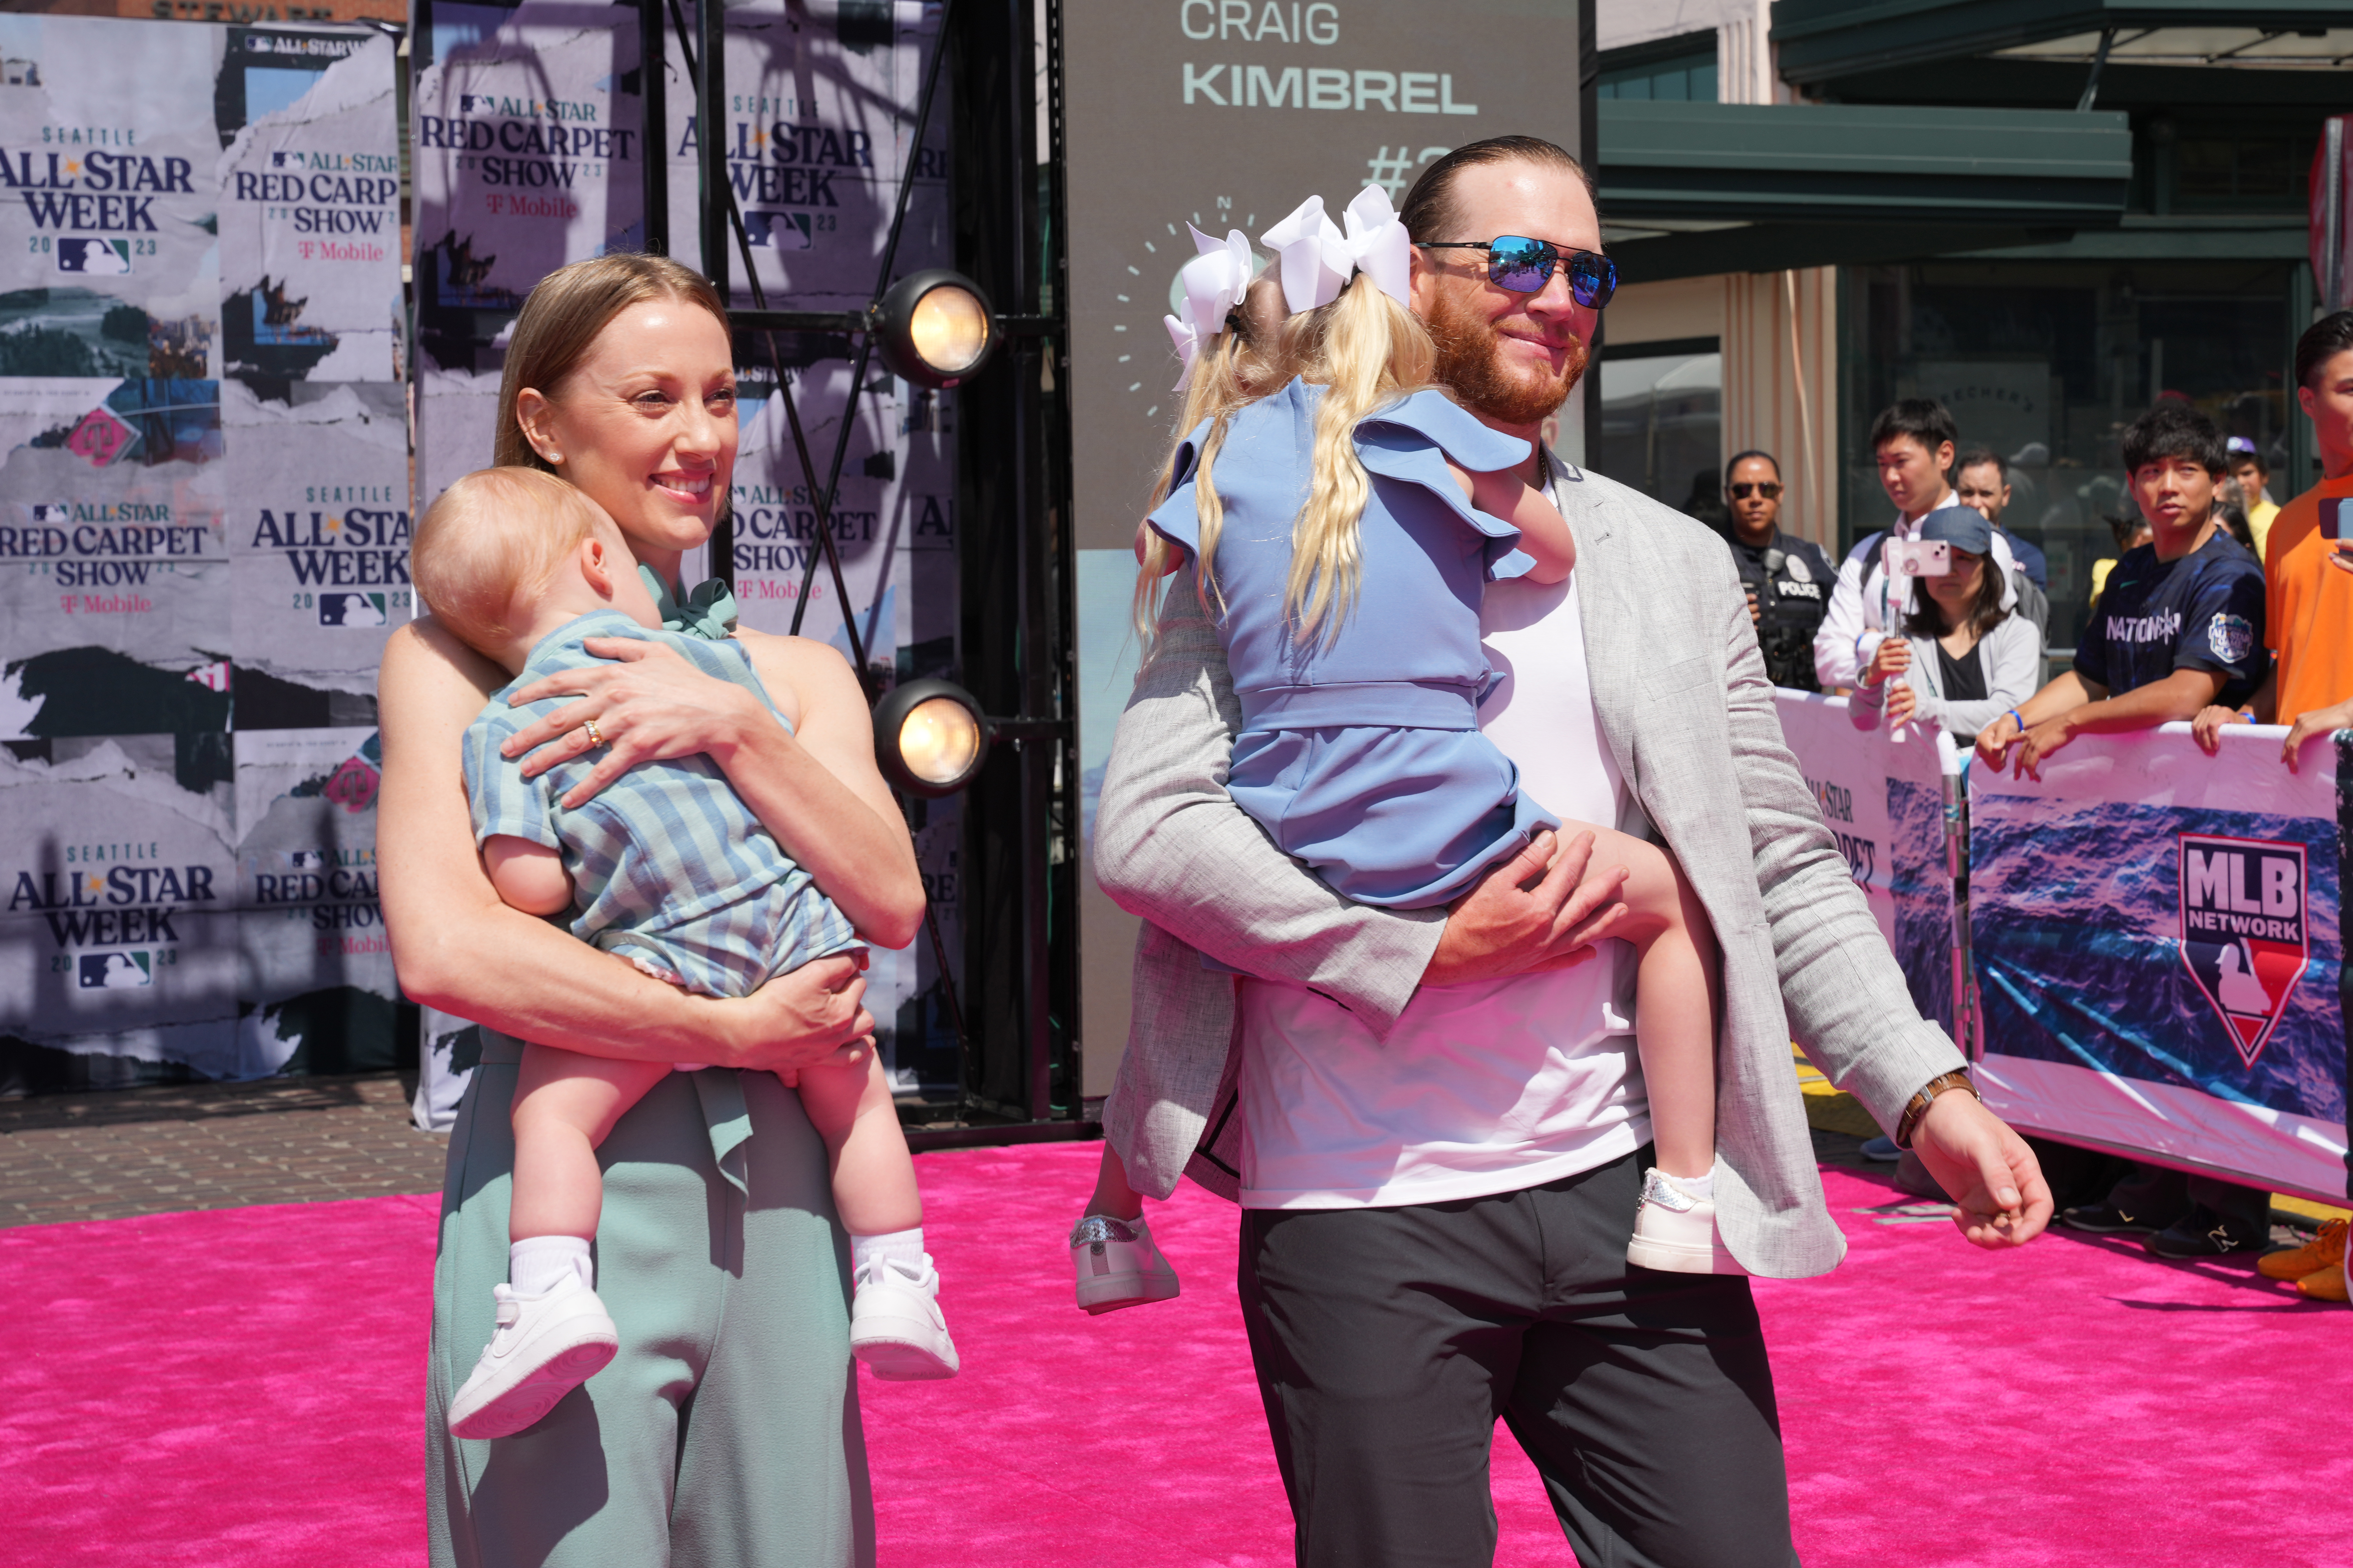 Ashley Holt Kimbrel carries Son Joseph and Craig Kimbrel carries daughter Lydia Joy as they walk during the All-Star Red Carpet Show at Pike Place Market on Tuesday, July 11, 2023, in Seattle, Washington. | Source: Getty Images